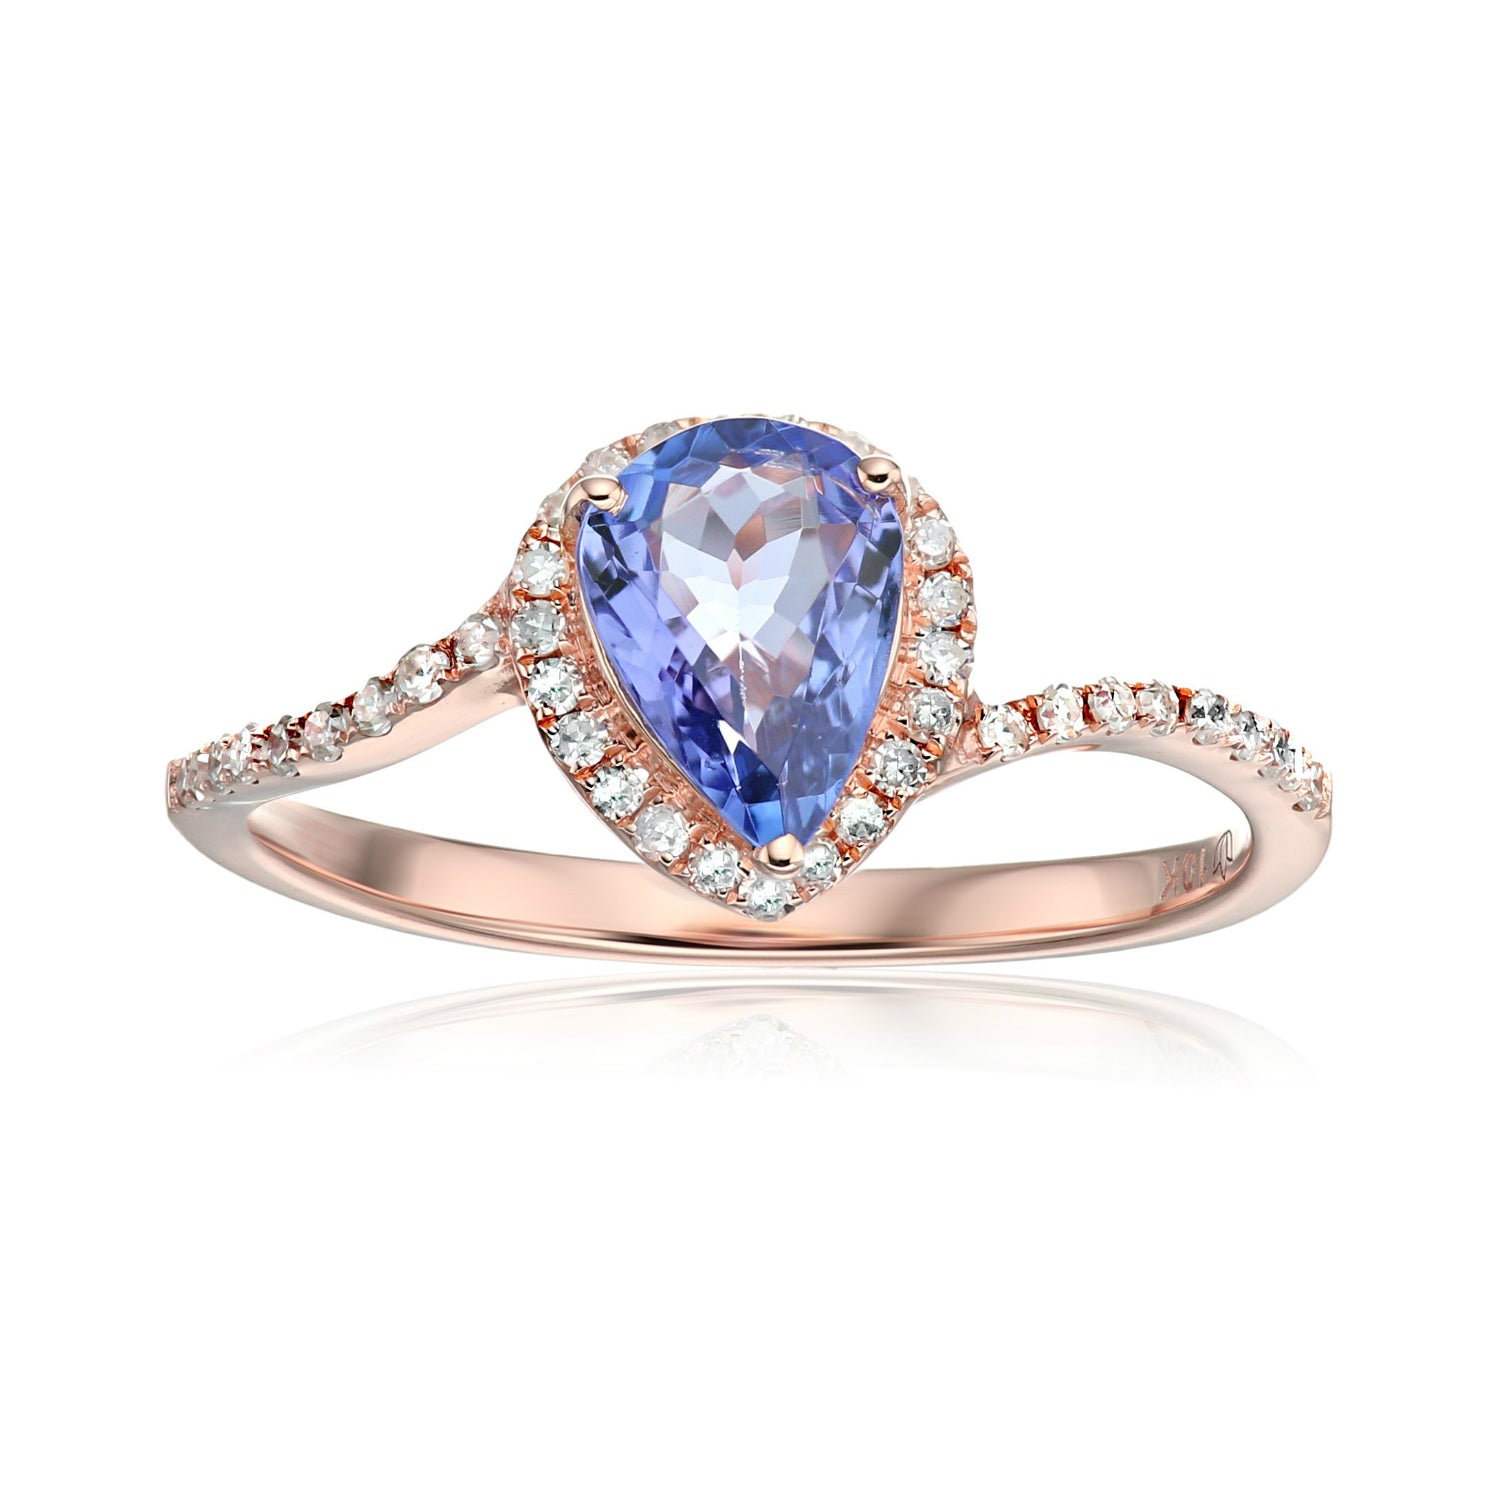 10k Rose Gold Tanzanite and Diamond Princess Diana Pear Shape Engagement Ring (1/5cttw, H-I Color, I1-I2 Clarity), - pinctore